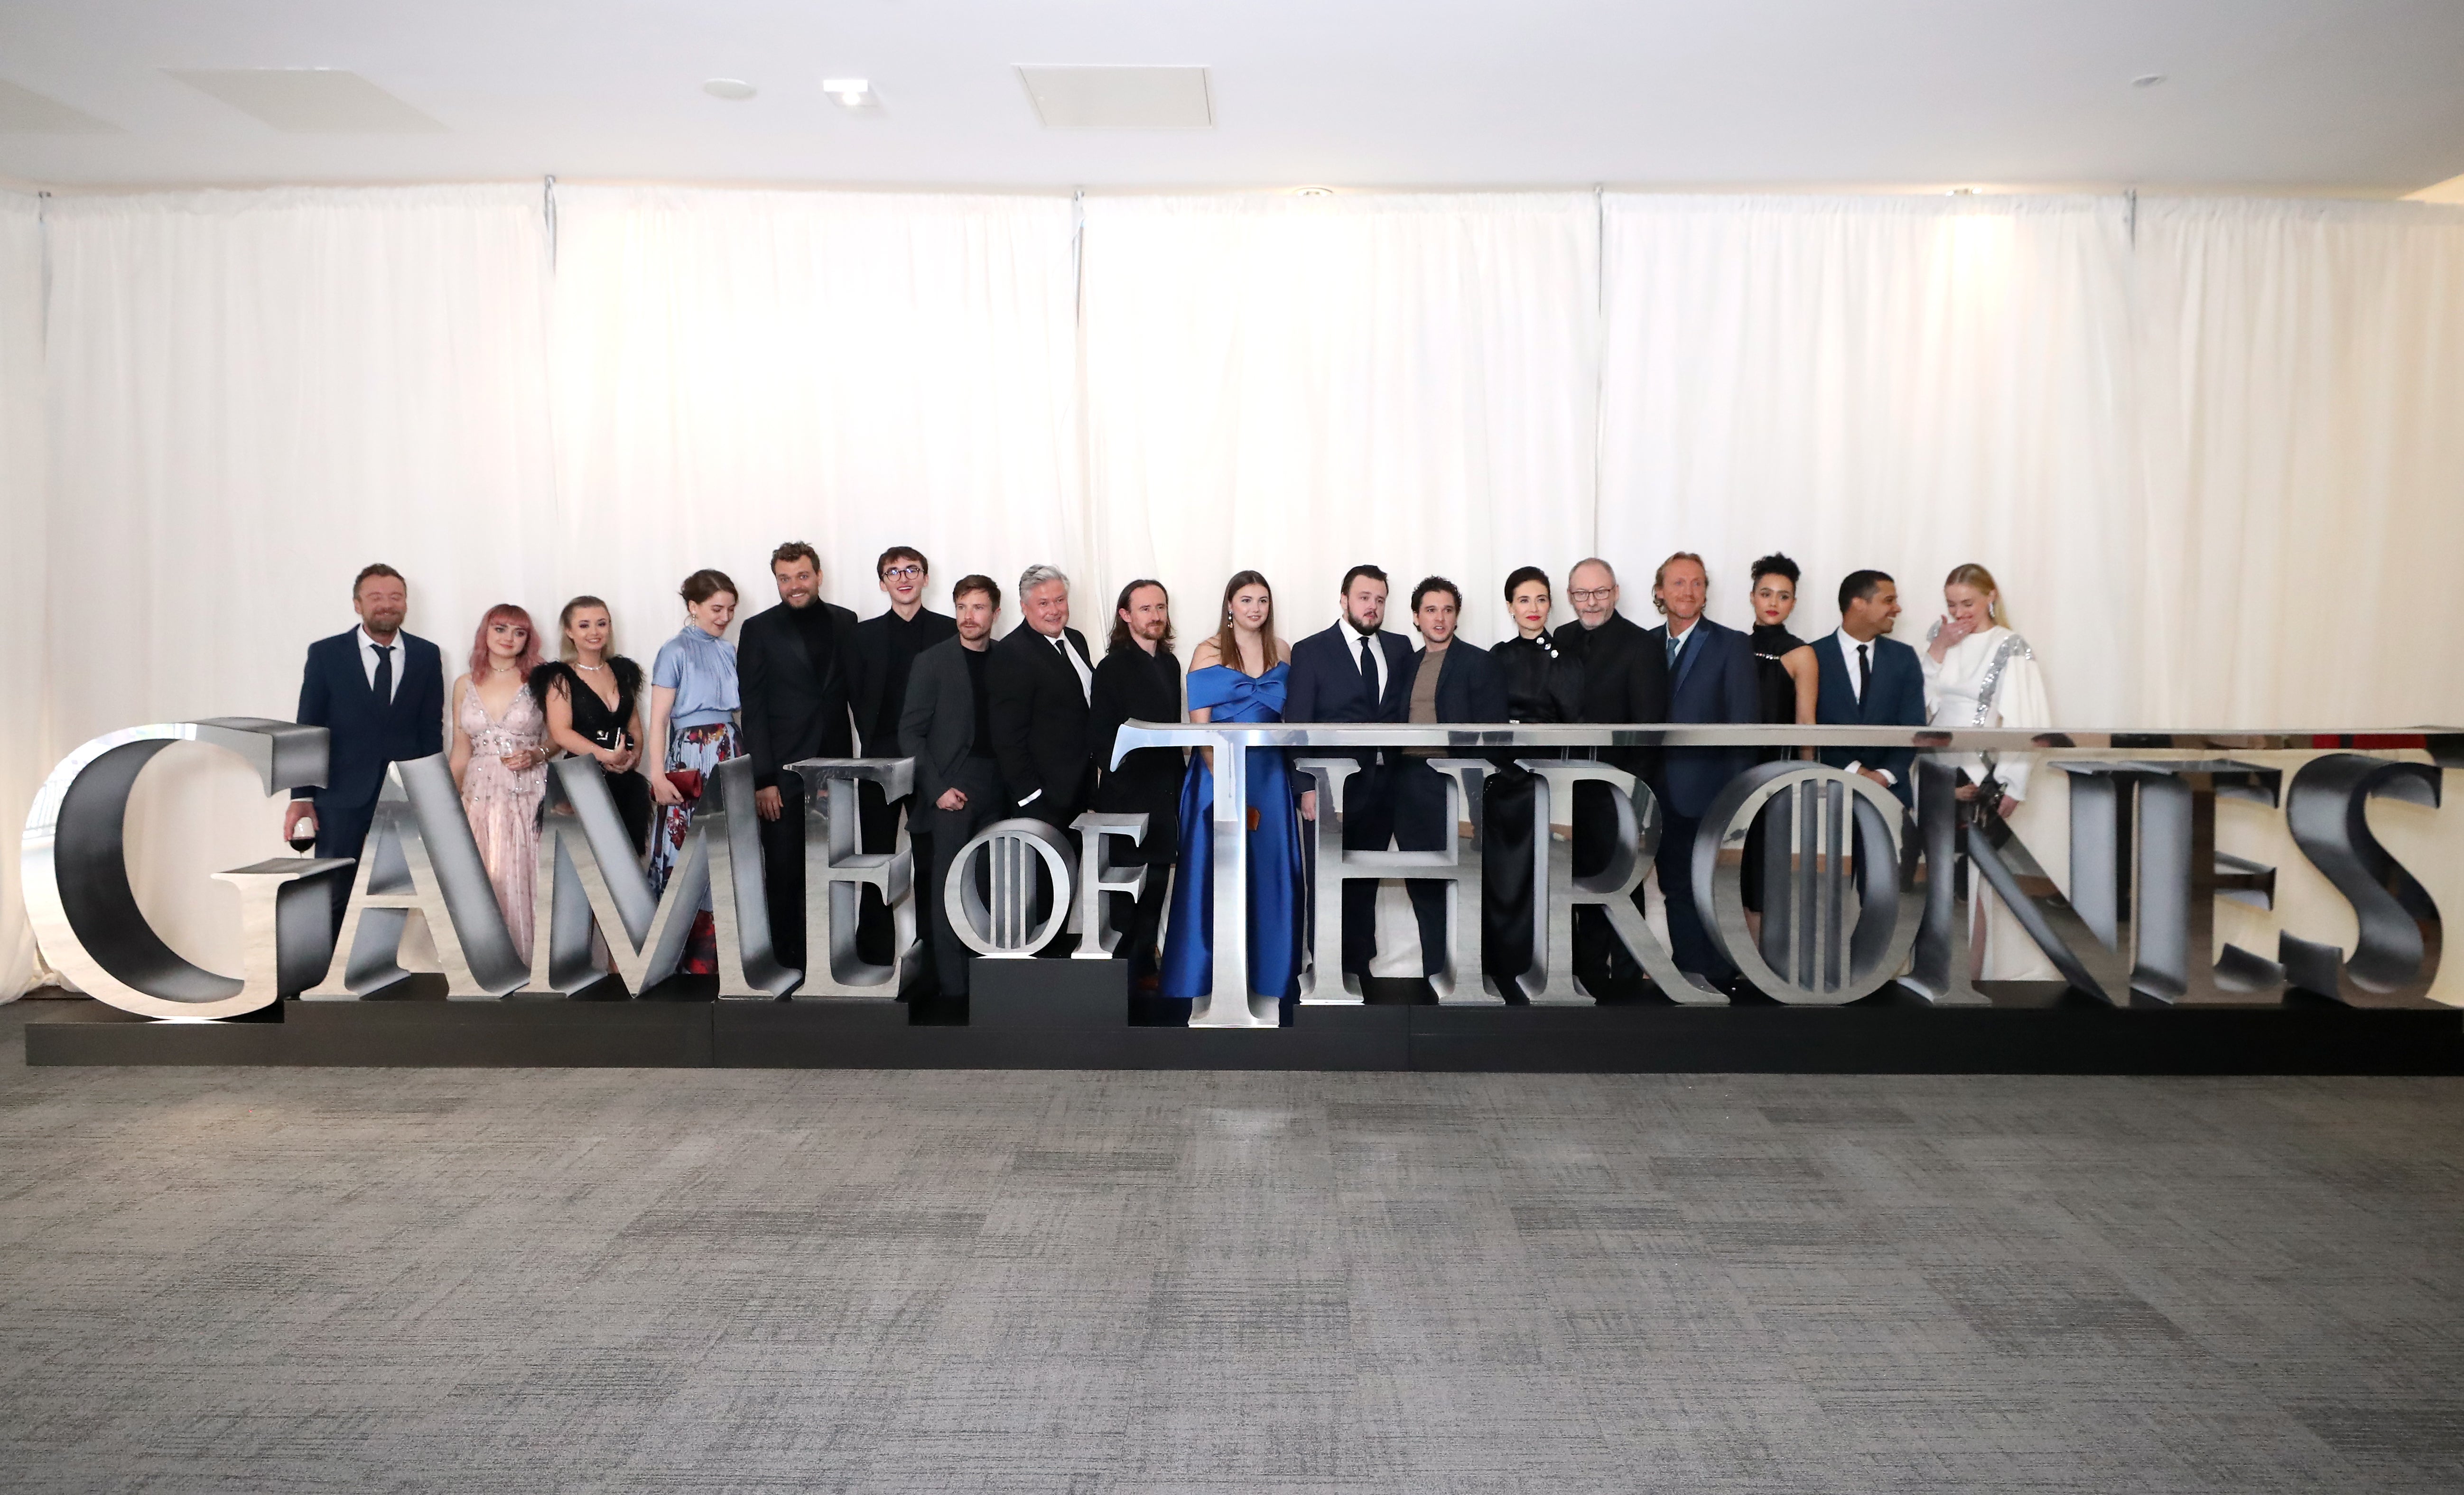 Cast and crew of HBO’s Game Of Thrones attend a premiere at the Waterfront Hall in Belfast (Liam McBurney/PA)